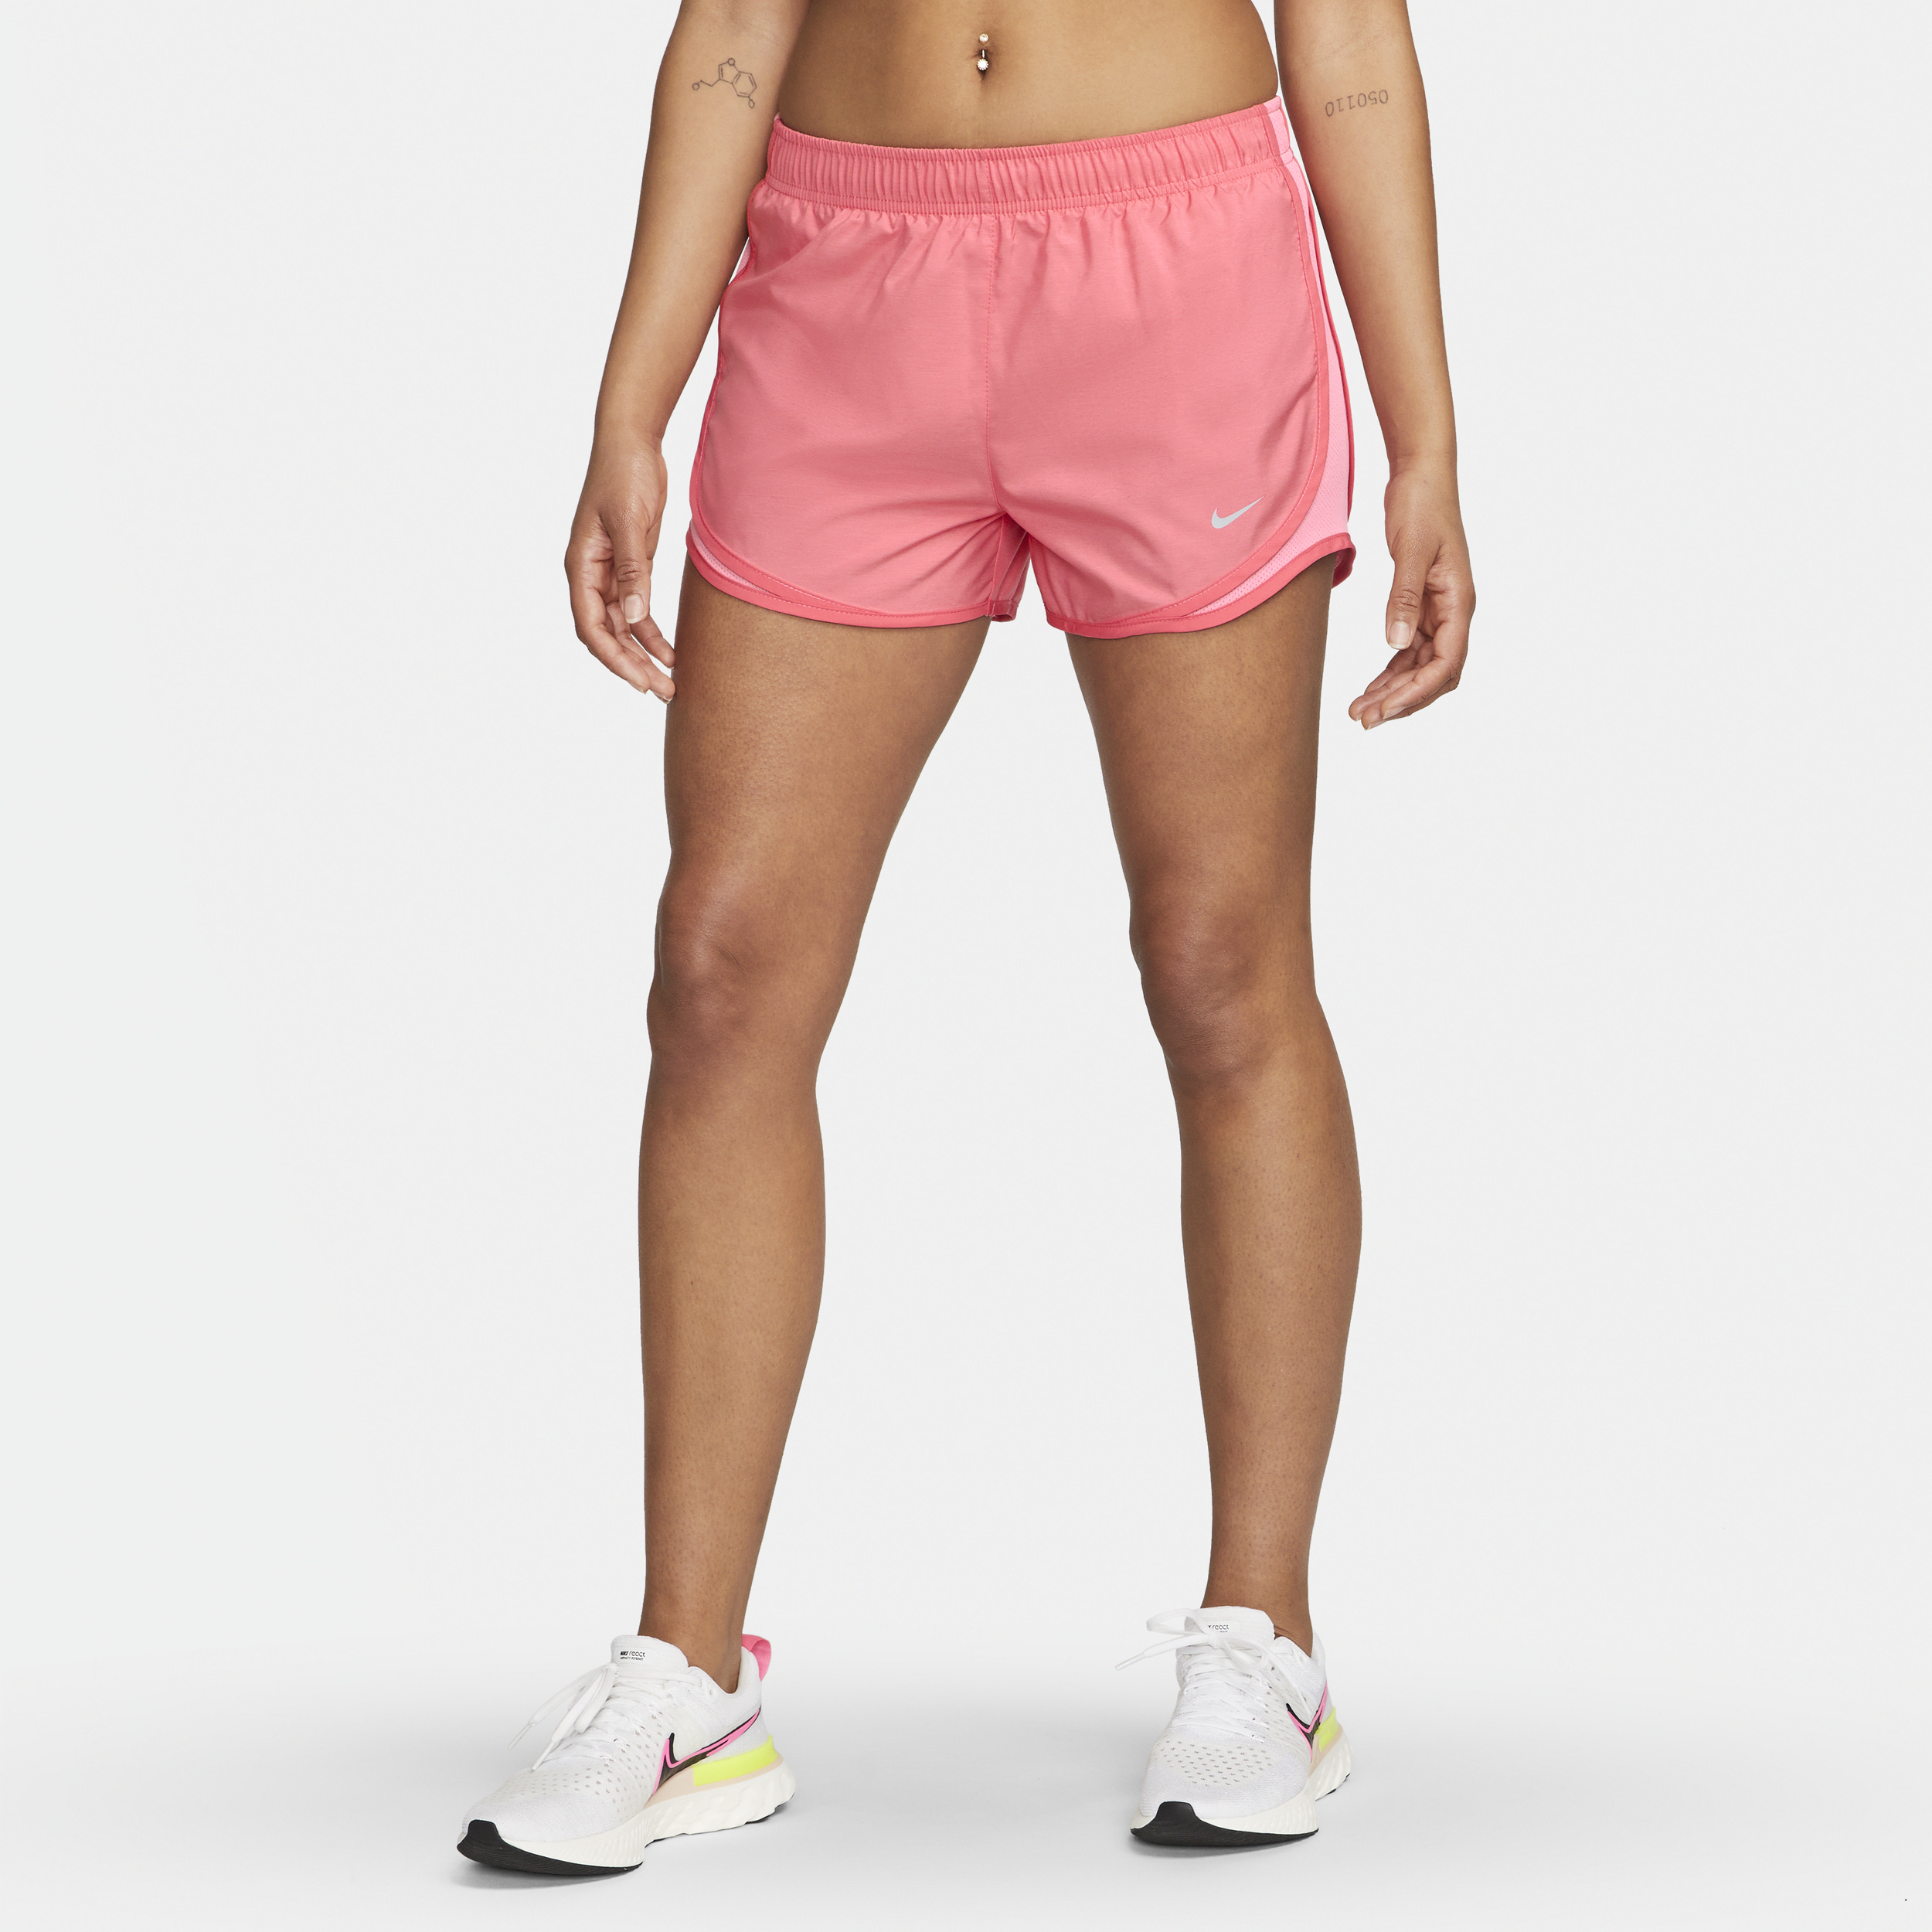 NIKE WOMEN'S TEMPO BRIEF-LINED RUNNING SHORTS,1009762215